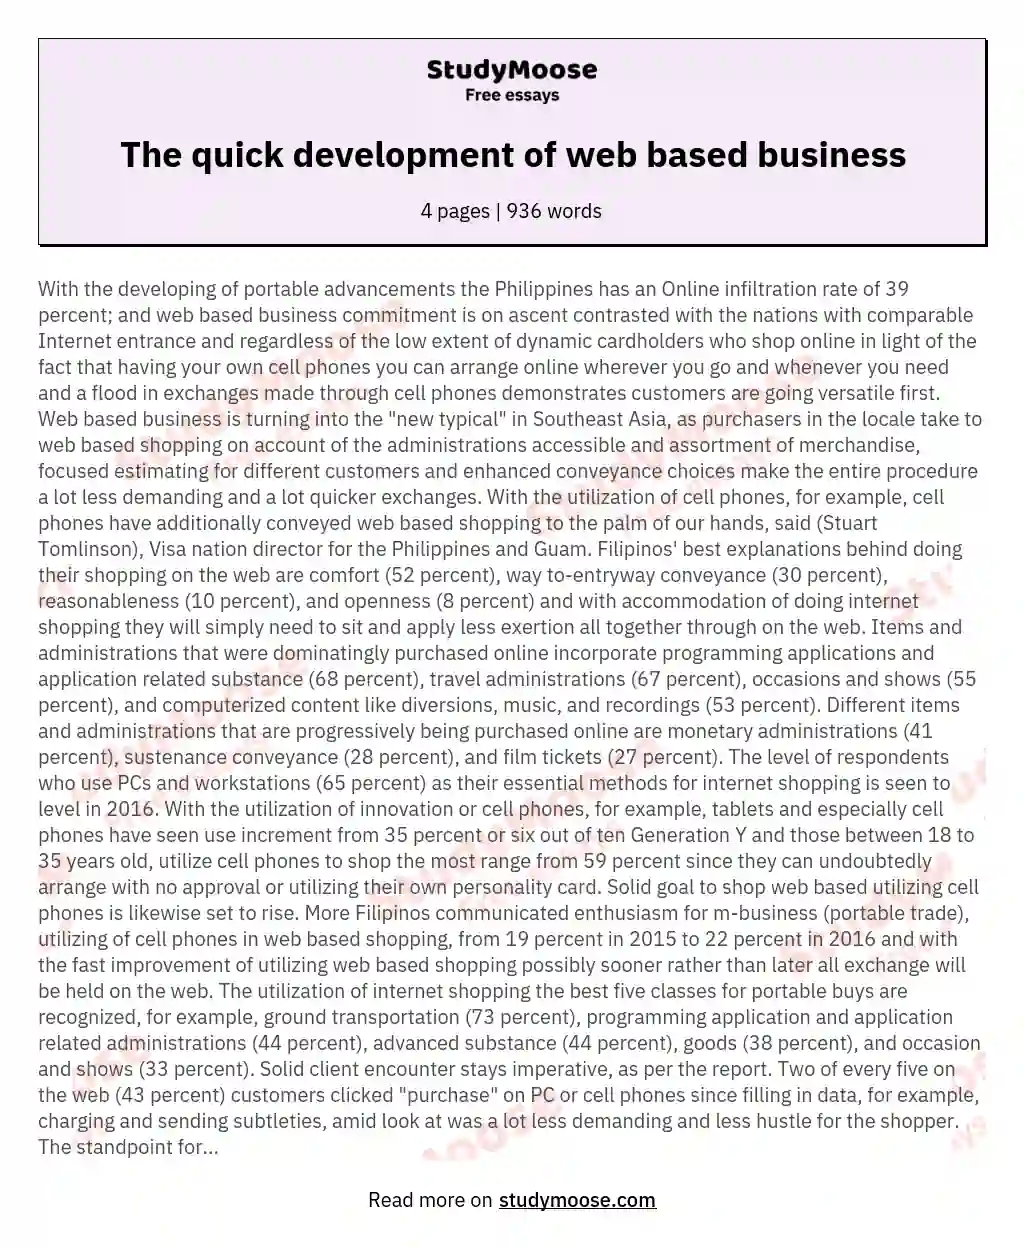 The quick development of web based business essay